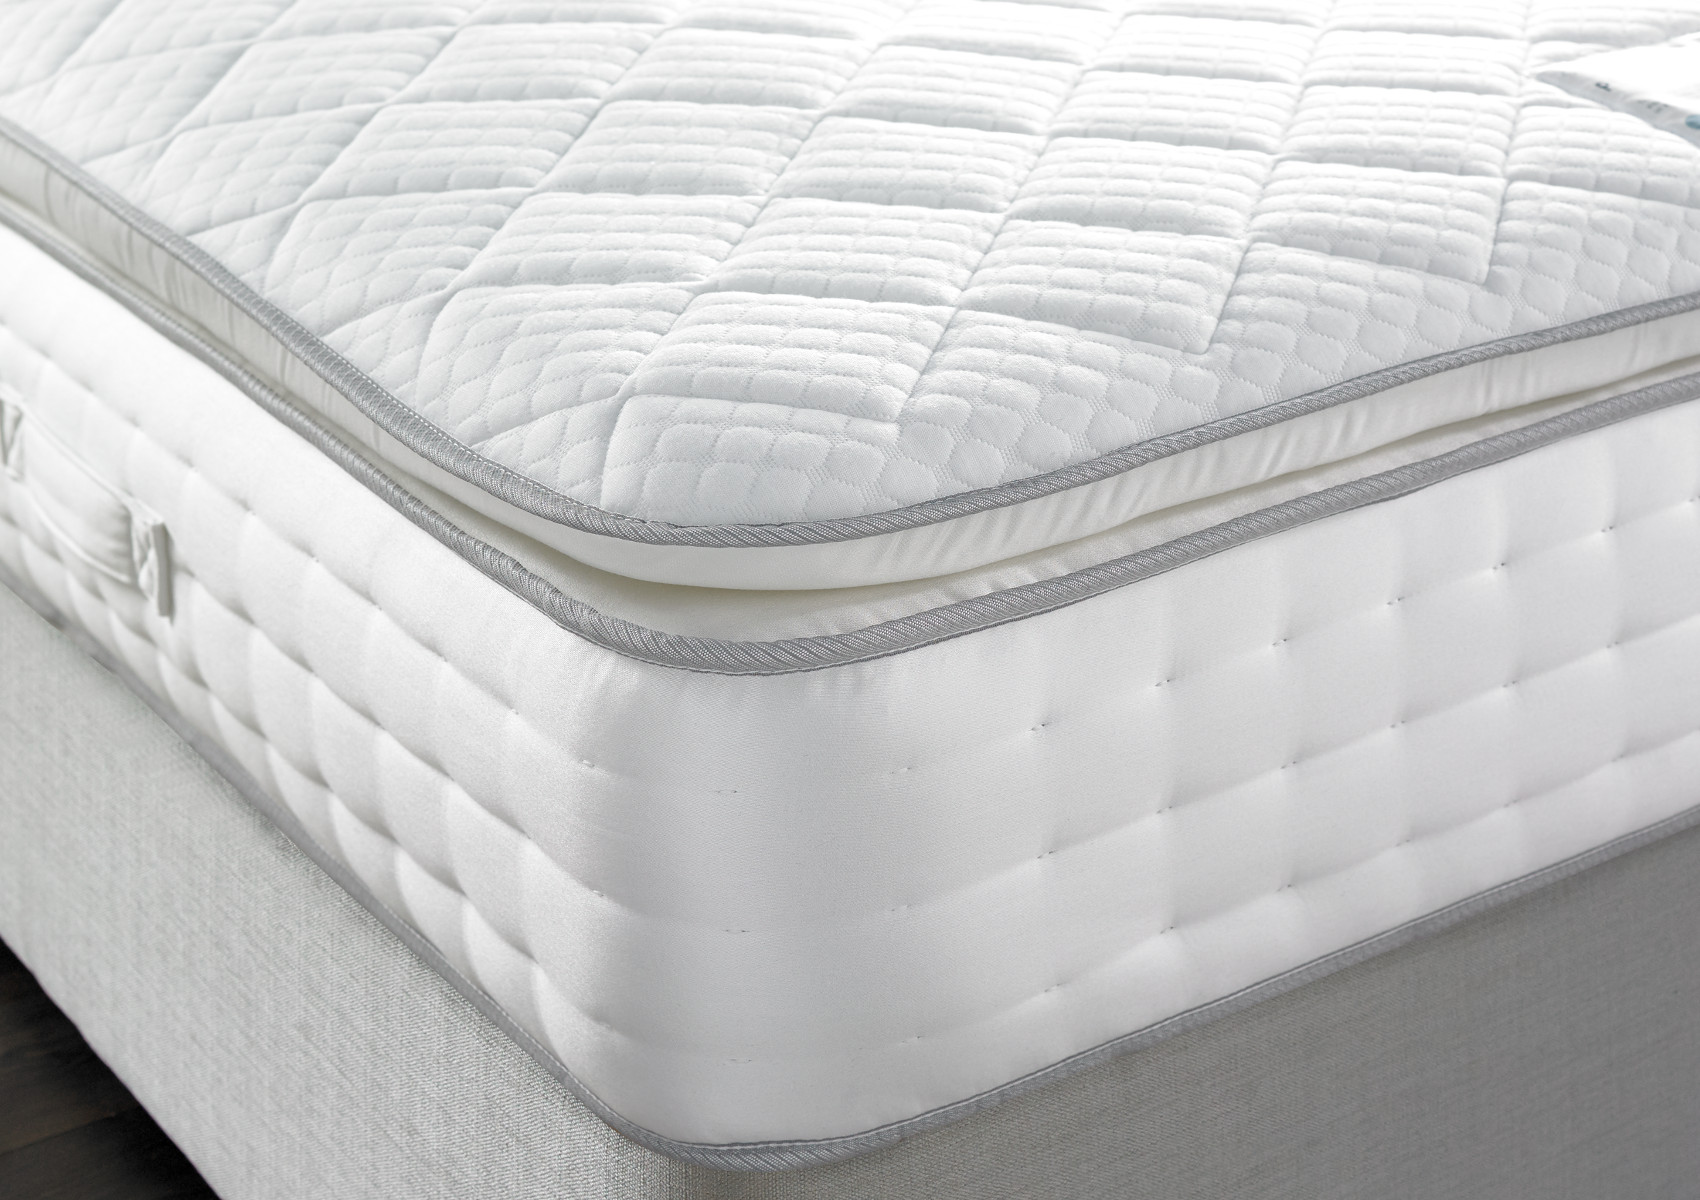 View Sleep Sanctuary Support 3000 Pocket Natural Pillow Top Quilted Mattress Time4Sleep information